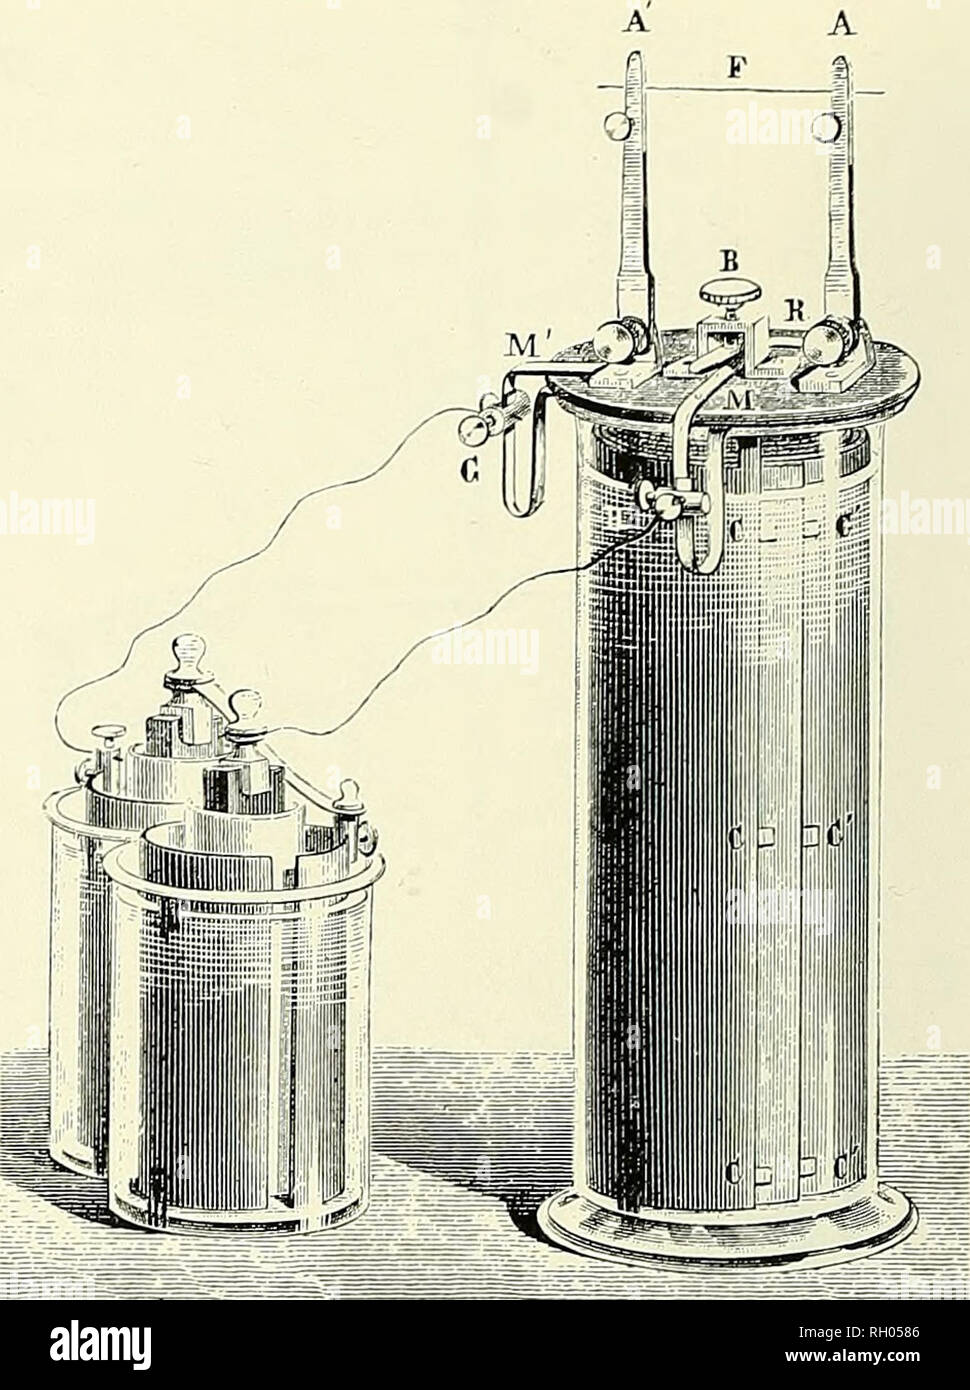 Bulletin. Science. Figure 29.—Charging a Plante cell with a Bunsen battery.  From Gaston Plante, Recherches sur I'electricite, Paris, 1883, p. 43.  Ritter, using the galvanic current, electrolyzed water and precipitated  metals